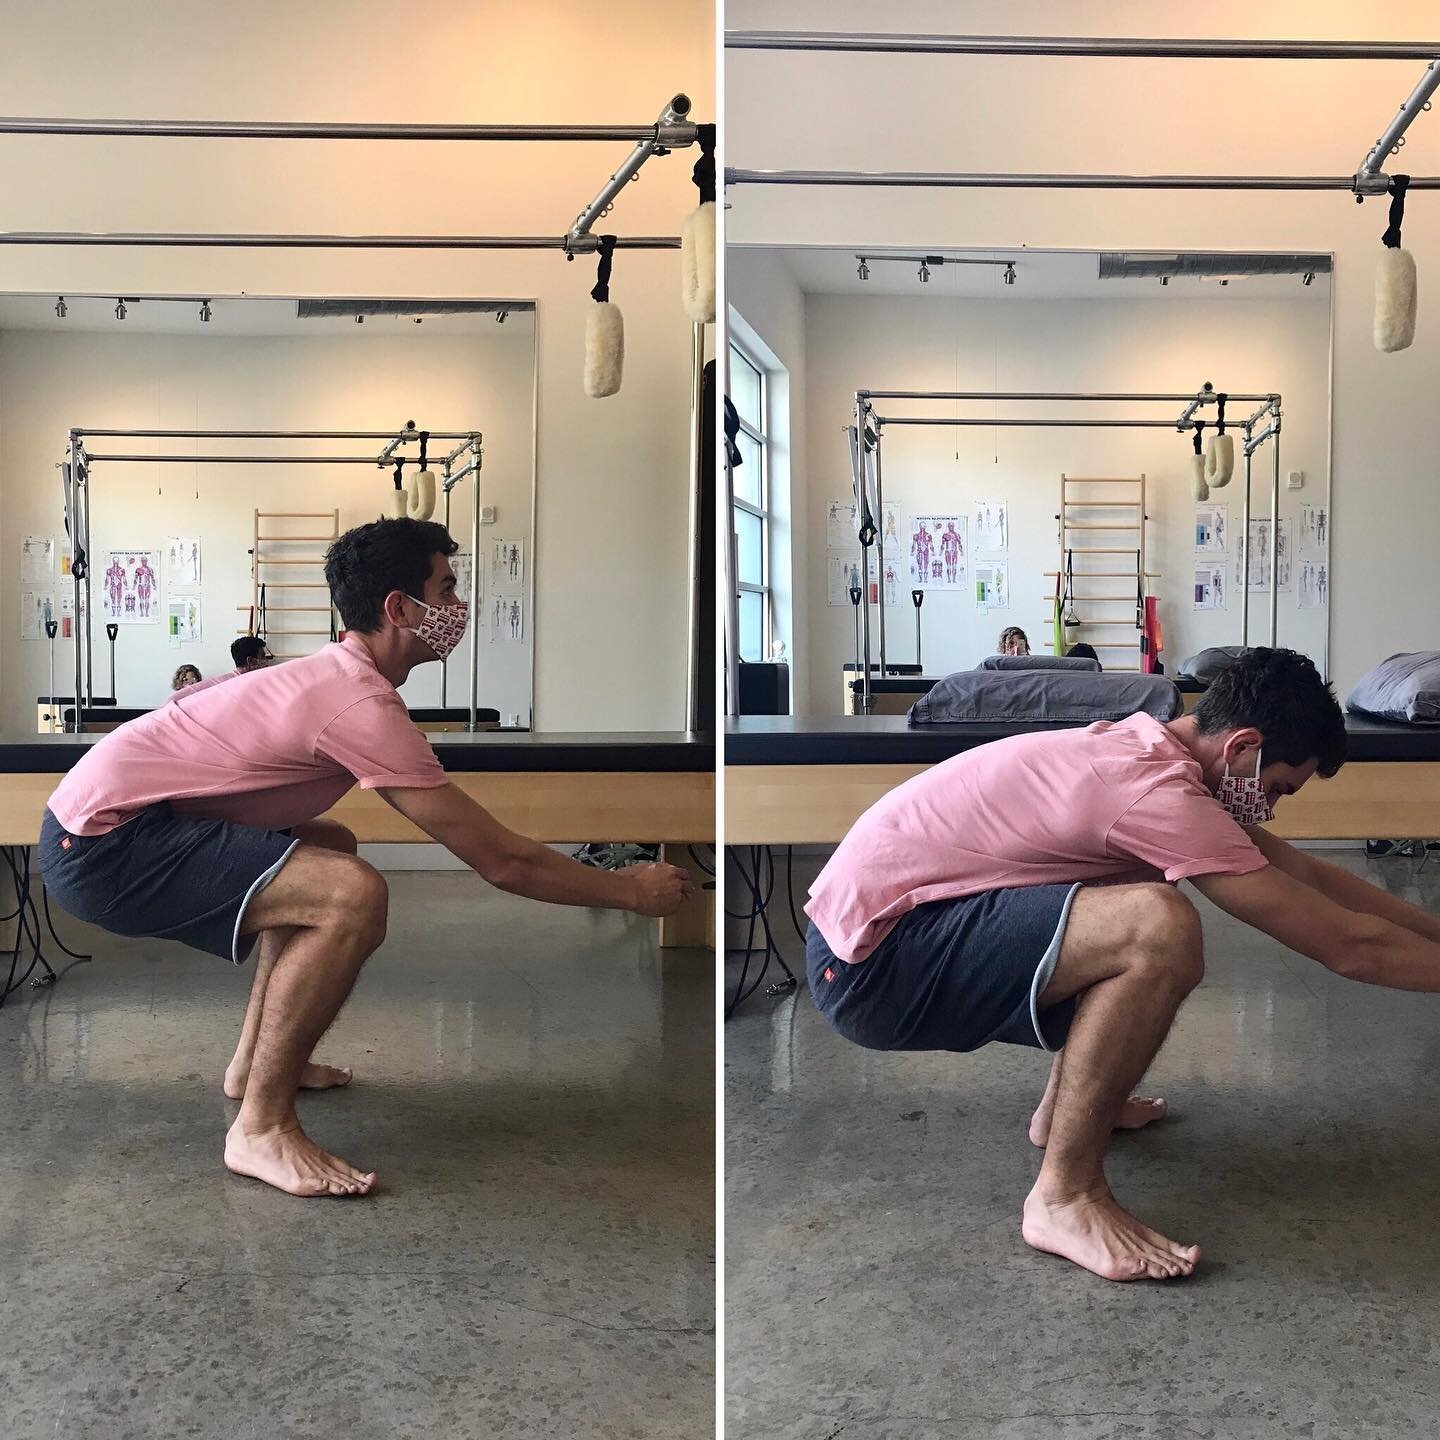 New client, former serious soccer player, came in wanting to work on his historically tight hips so he can build up to doing a pistol squat. I first did my uncoiling technique on his arms as they were the things most impacting the tightness in his hi